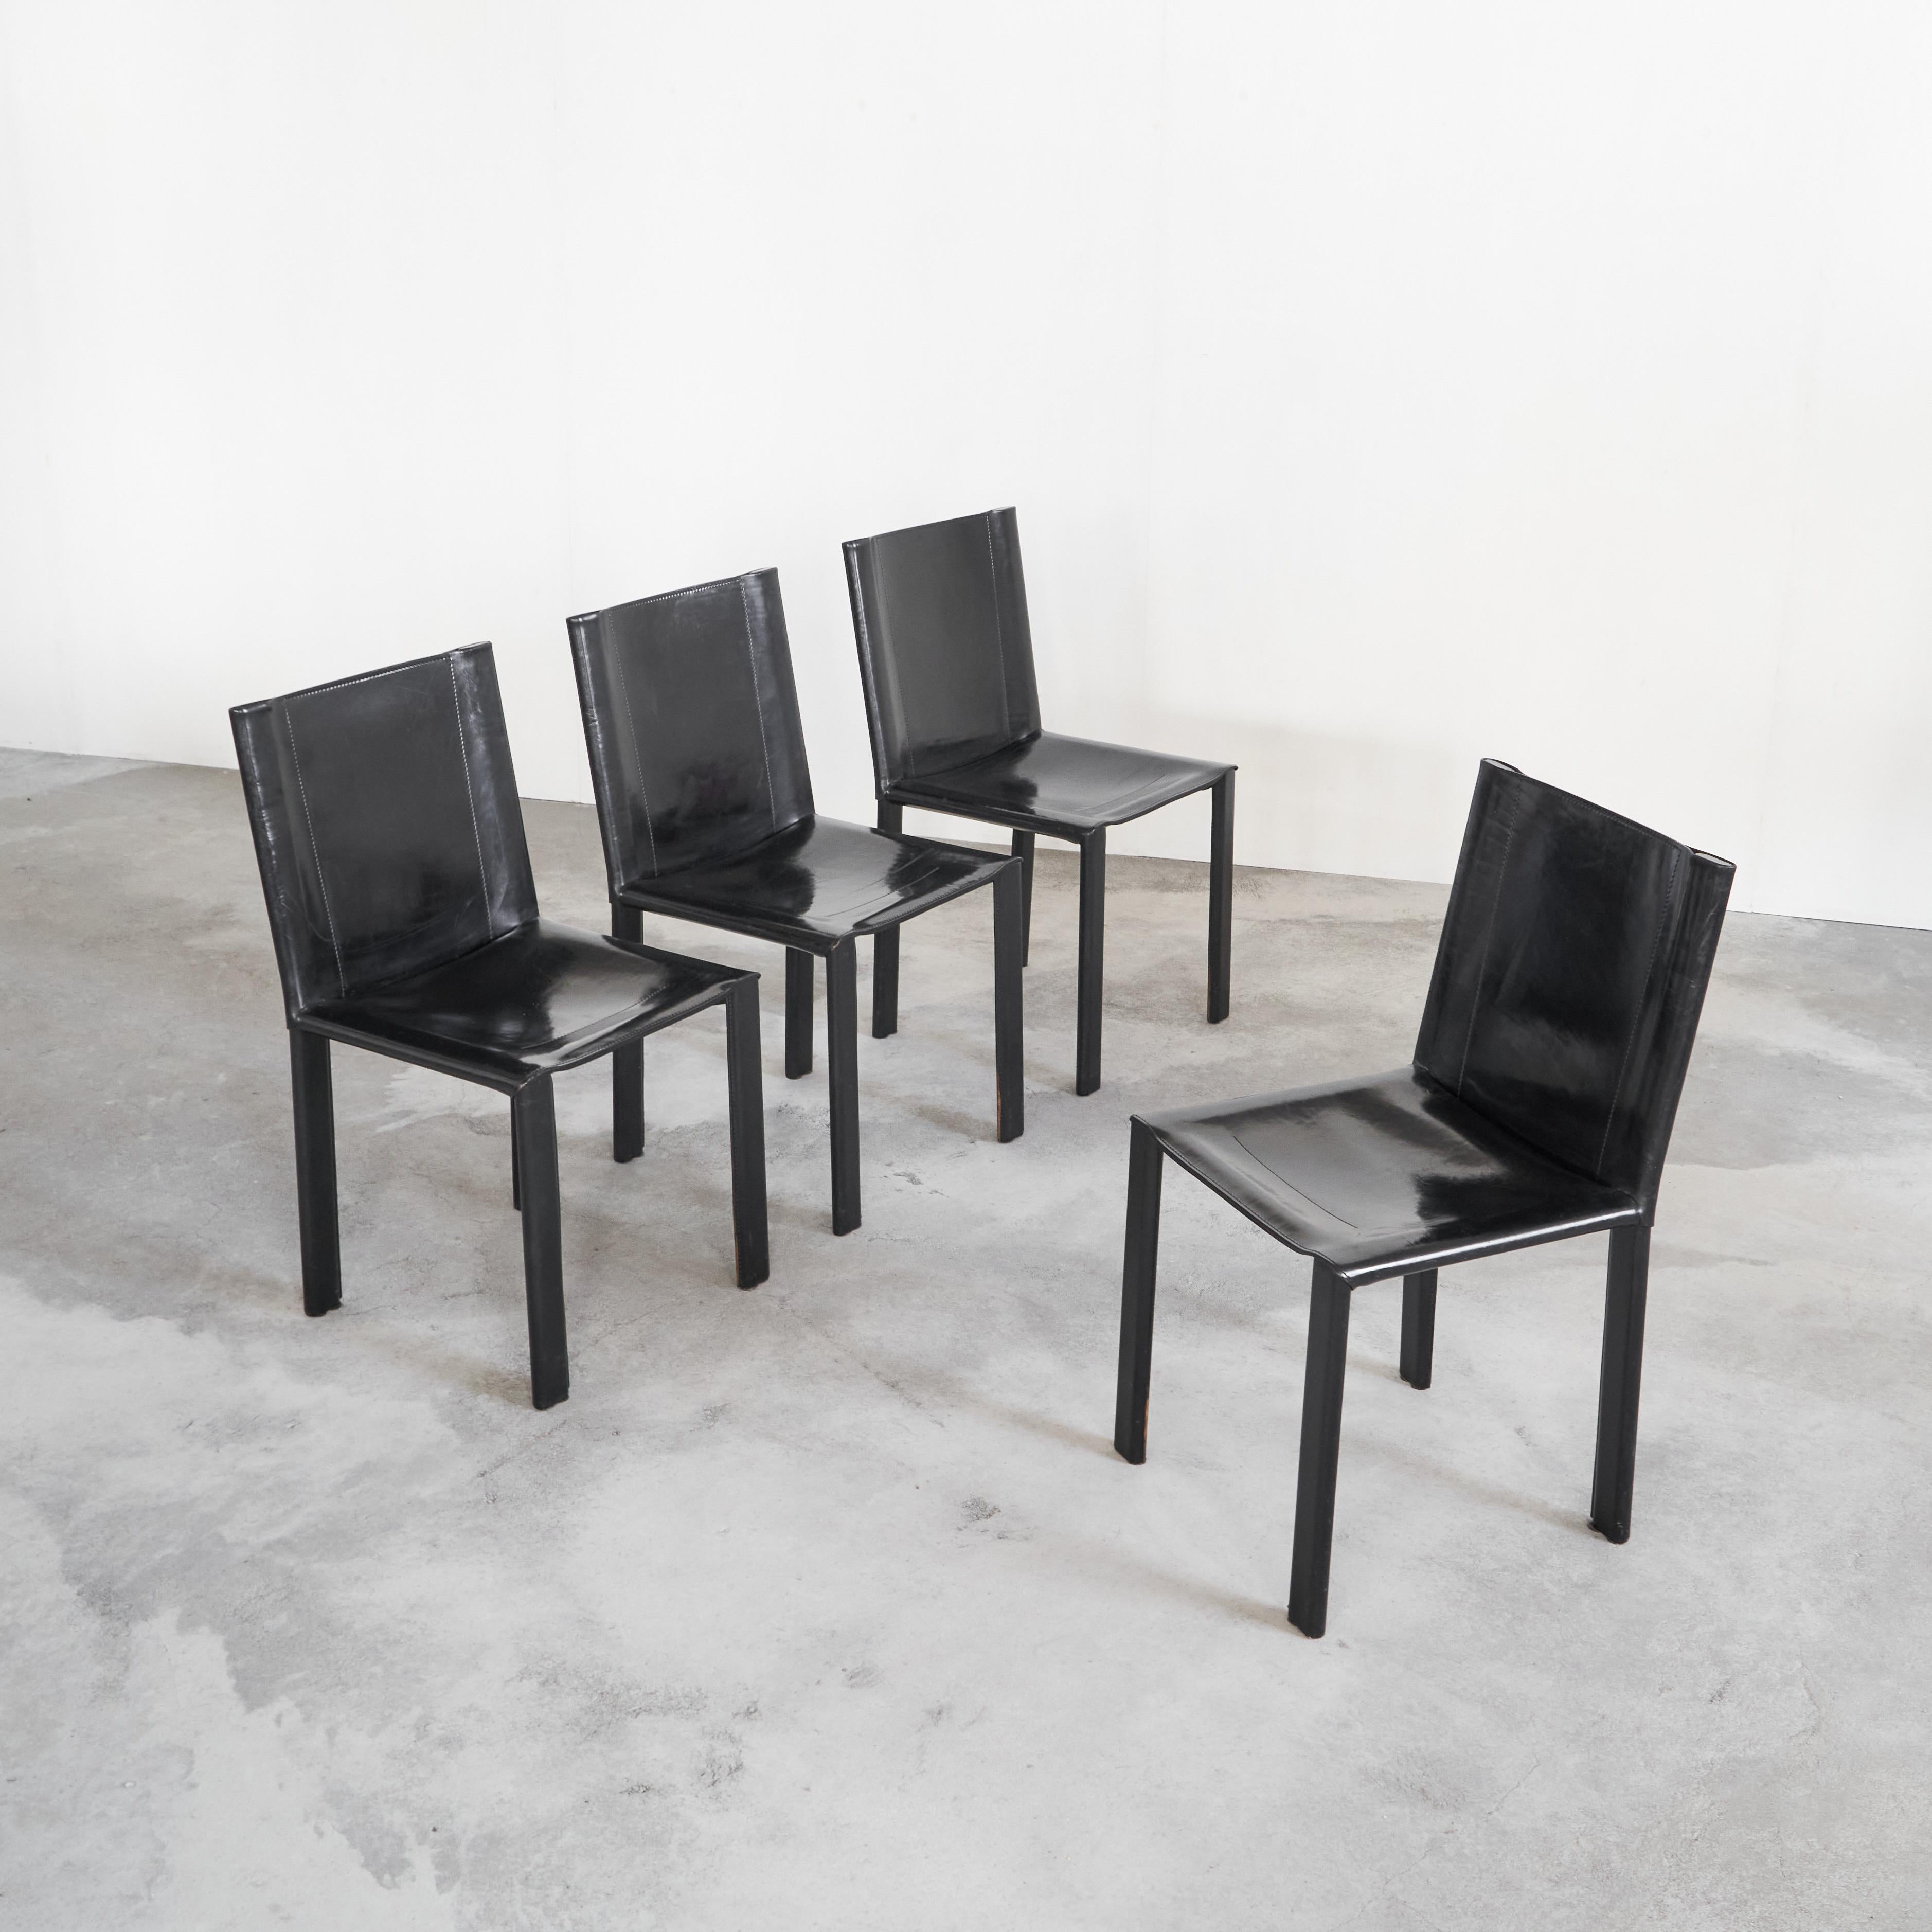 Set of 4 Black Leather Chairs by Matteo Grassi, Italy, 1990s.

A wonderful high quality set of four Matteo Grassi chairs with beautiful patinated black saddle leather. Resembles the famous CAB chairs by Bellini in the way they look and in the way